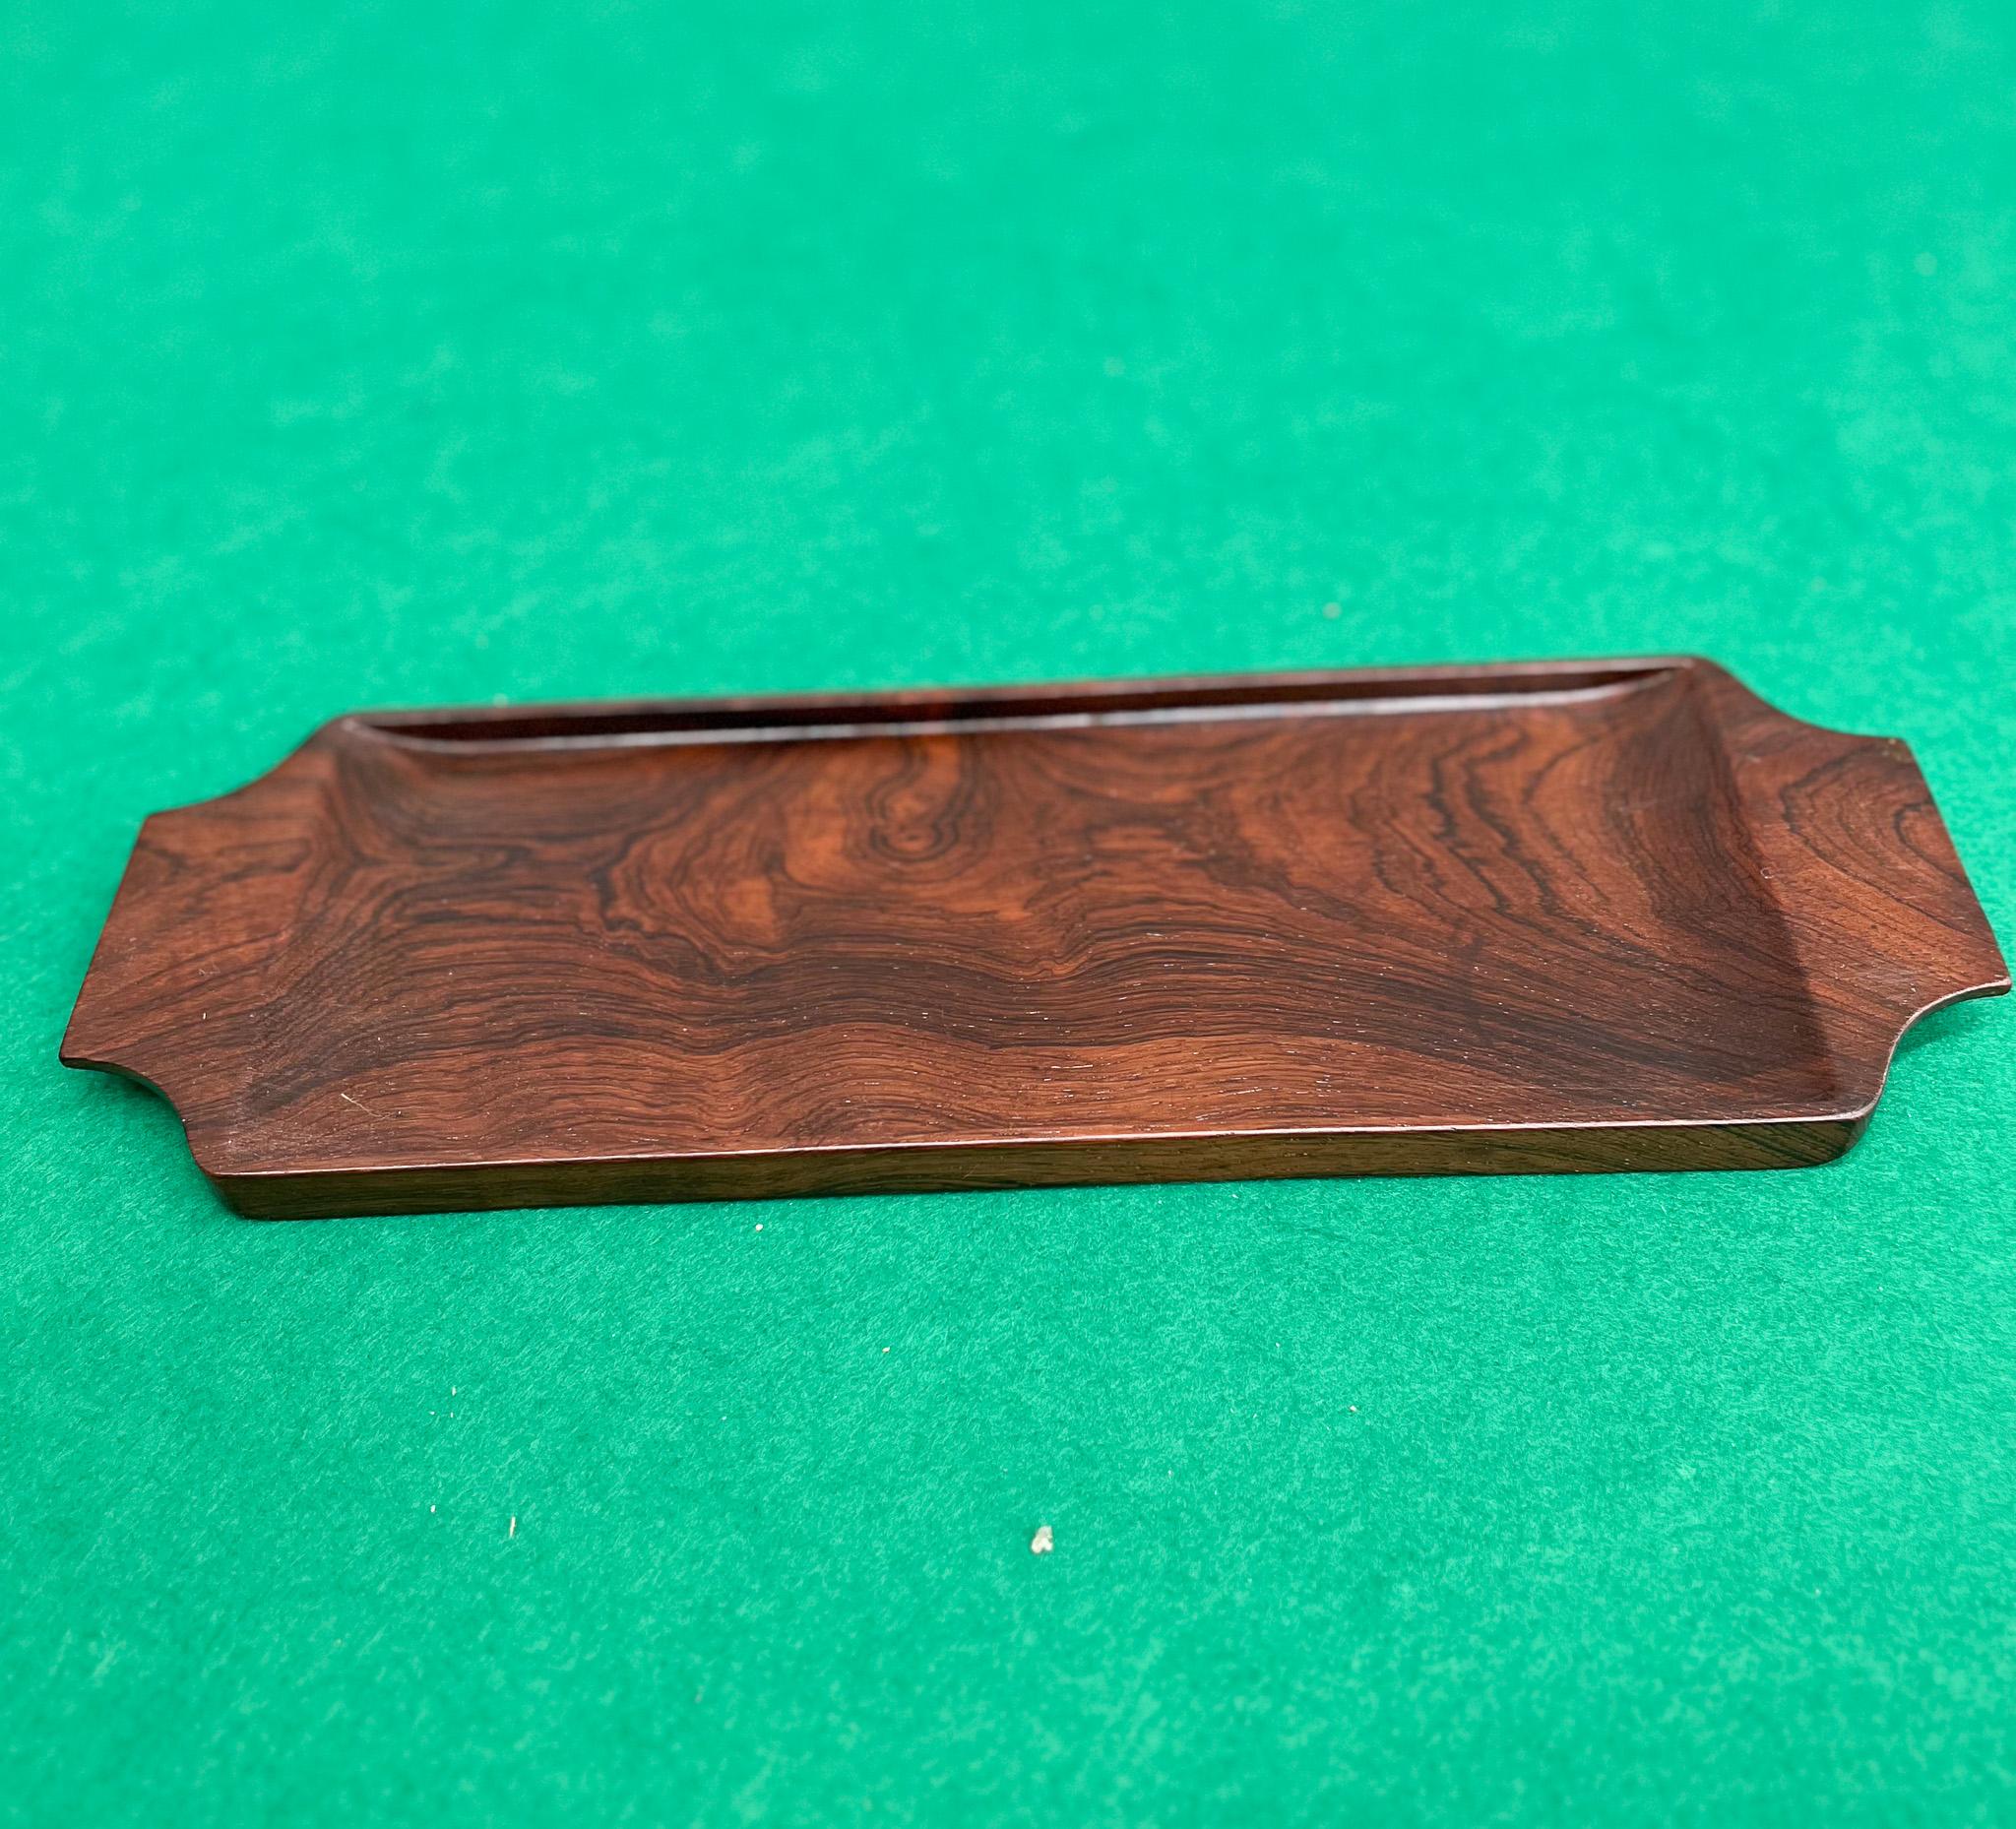 Available today, this Brazilian mid-century modern serving platter is absolutely stunning.  This platter is handcrafted with Brazilian rosewood (also known as jacaranda) and features clean lines with elegant curves. The wood has a deep, dark, and